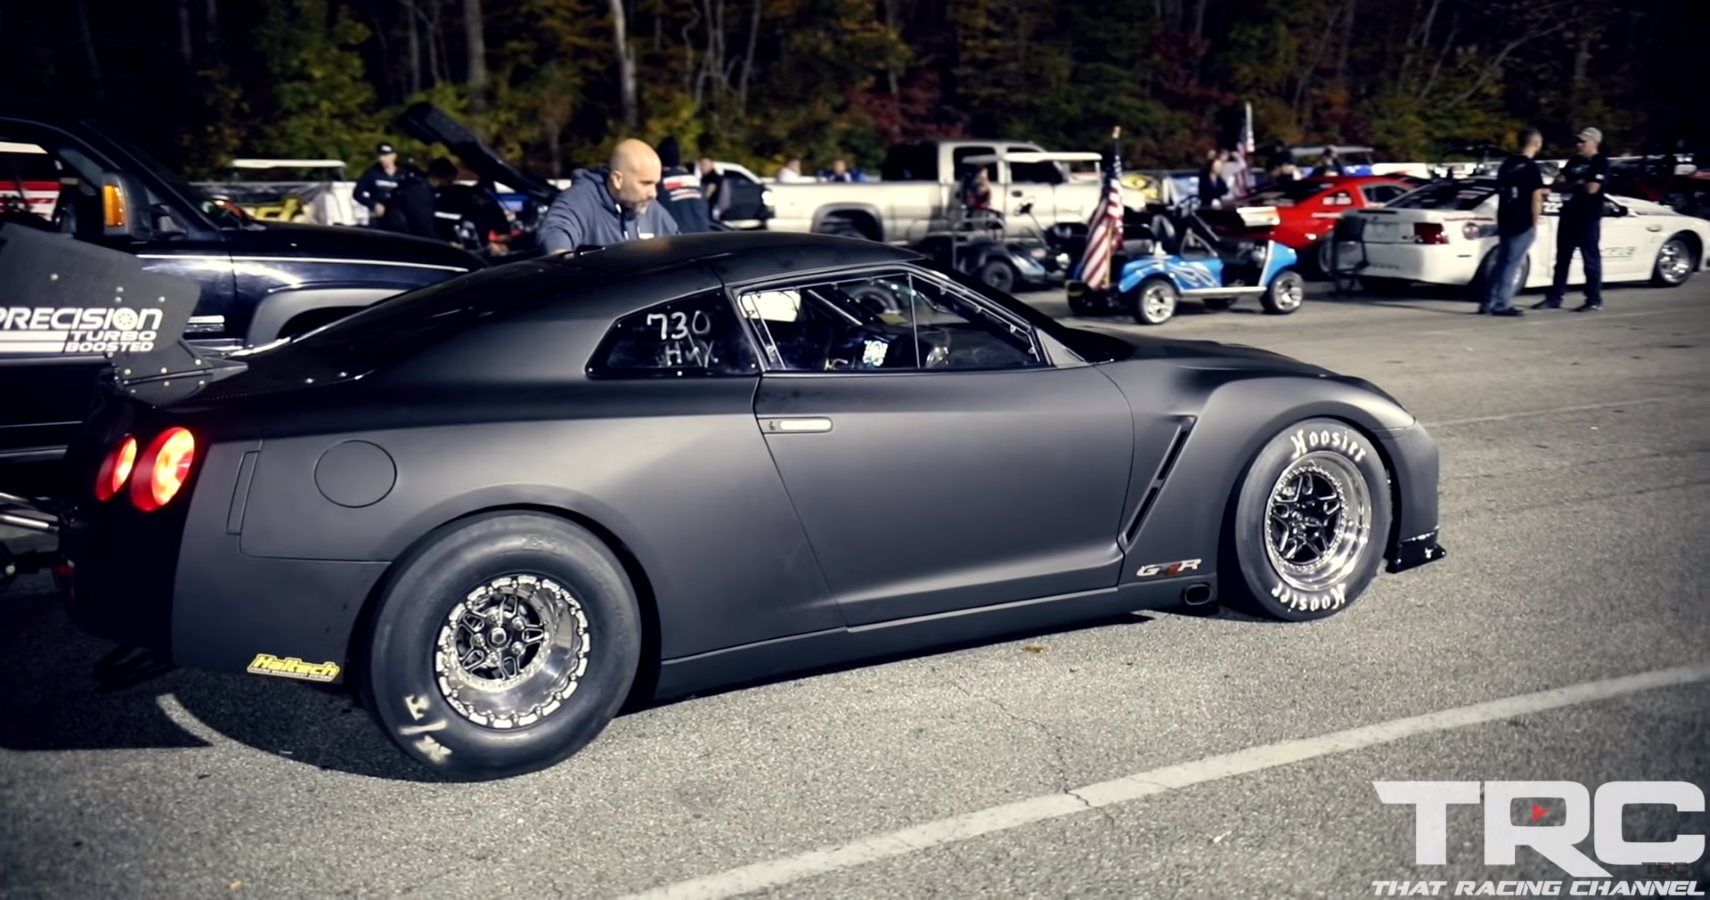 Check Out This Insanely Powerful Nissan GT-R Hit 210 MPH In 7 Seconds